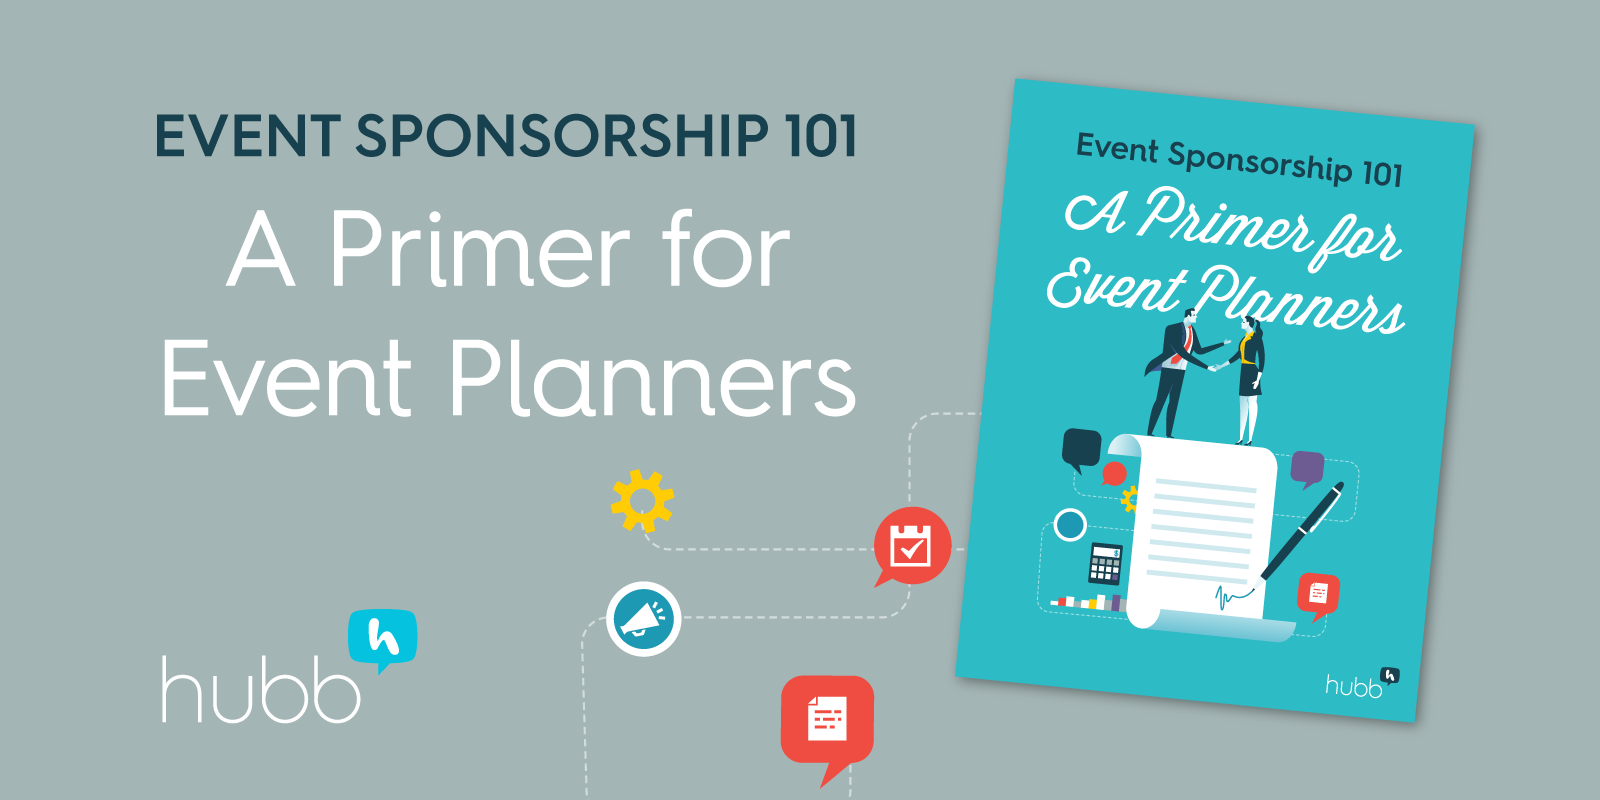 Event sponsorship 101: How to get your event sponsored